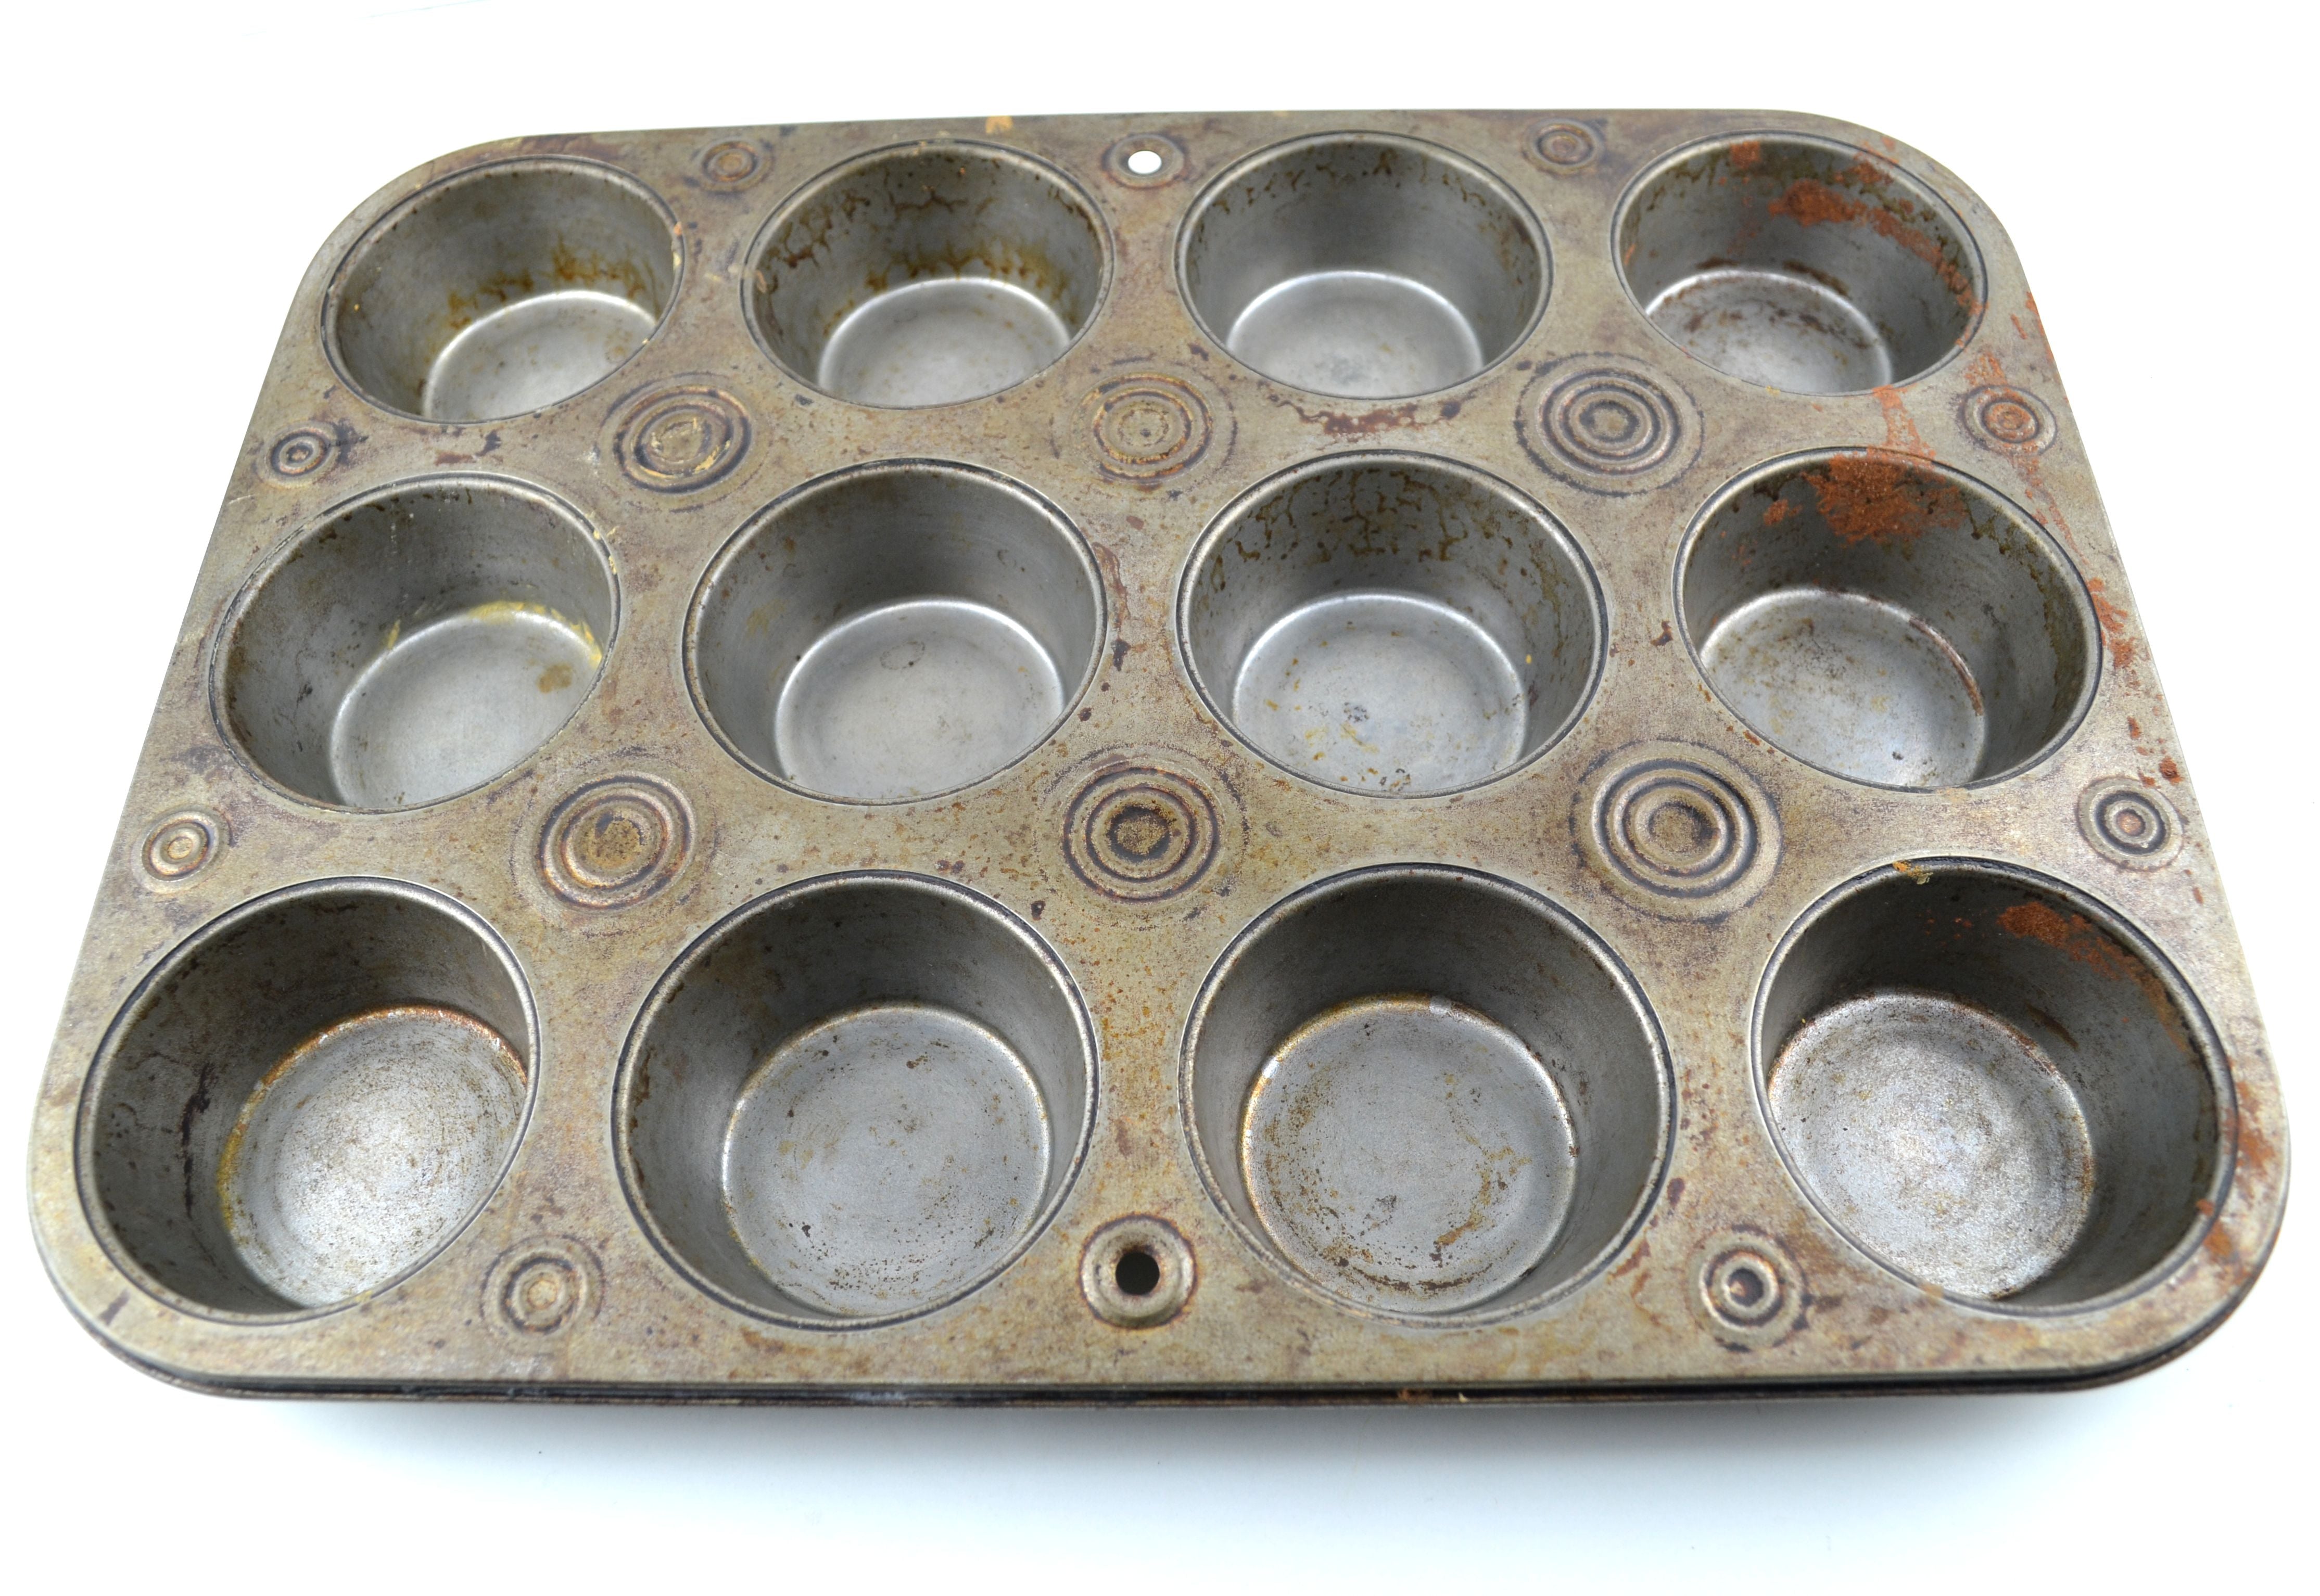 Vintage Muffin Pan, Vintage Muffin Tin, 12 Cup Muffin Pan